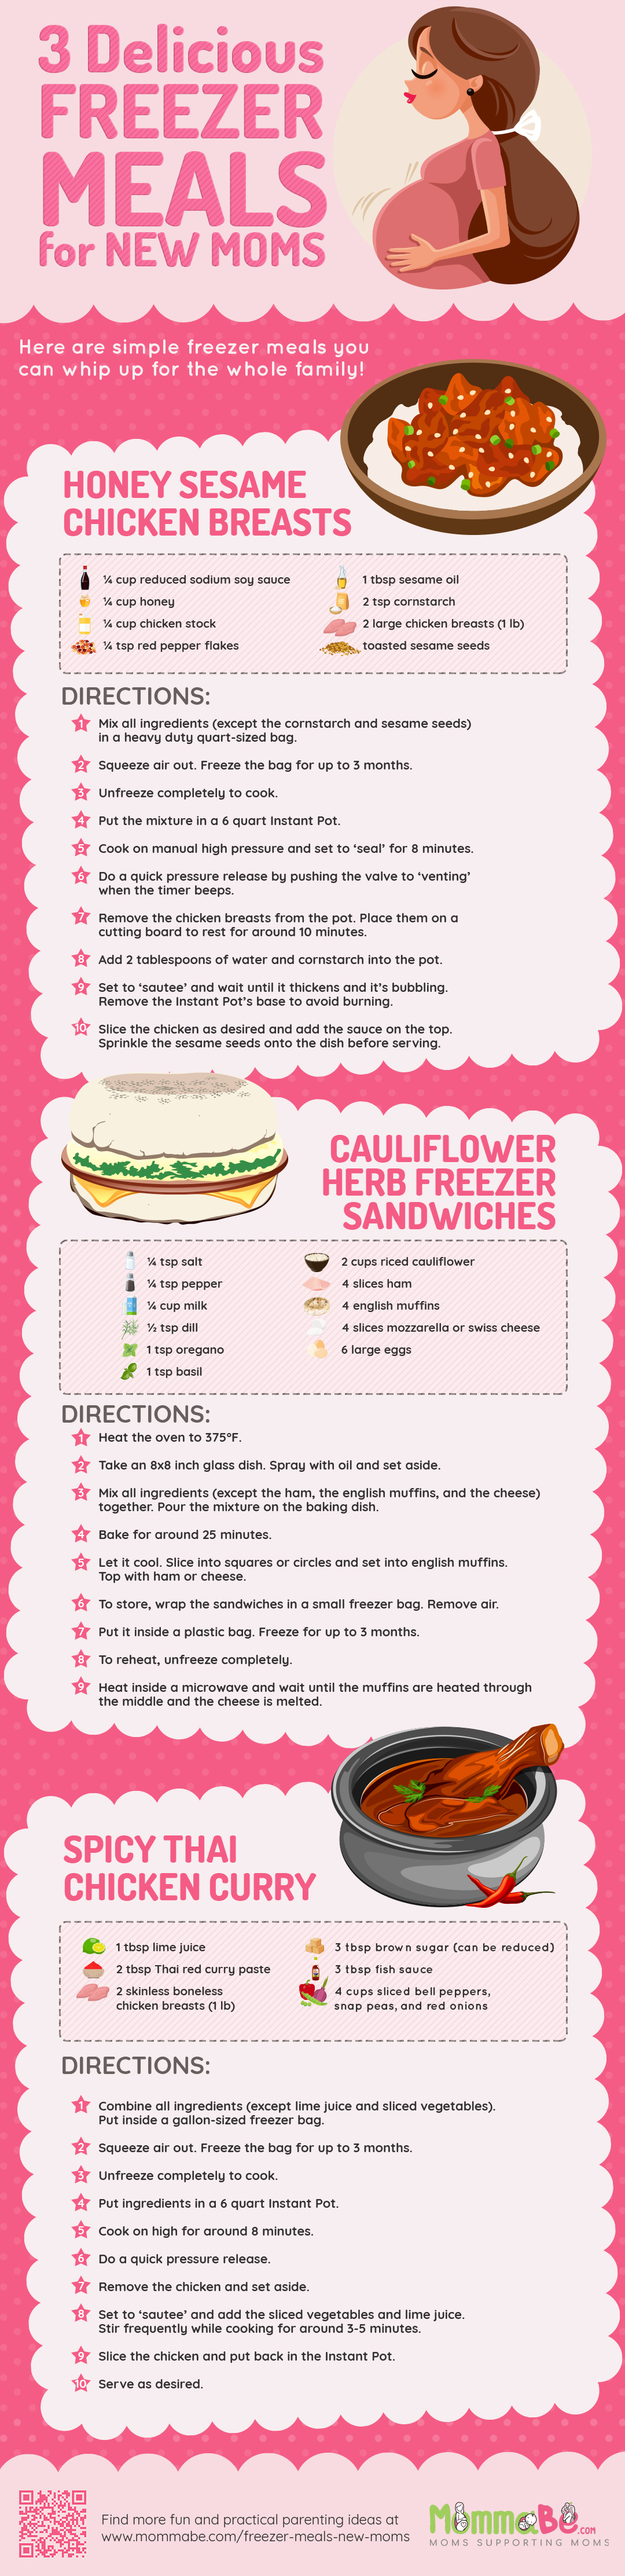 Infographic | 3 Delicious Freezer Meal For New Moms